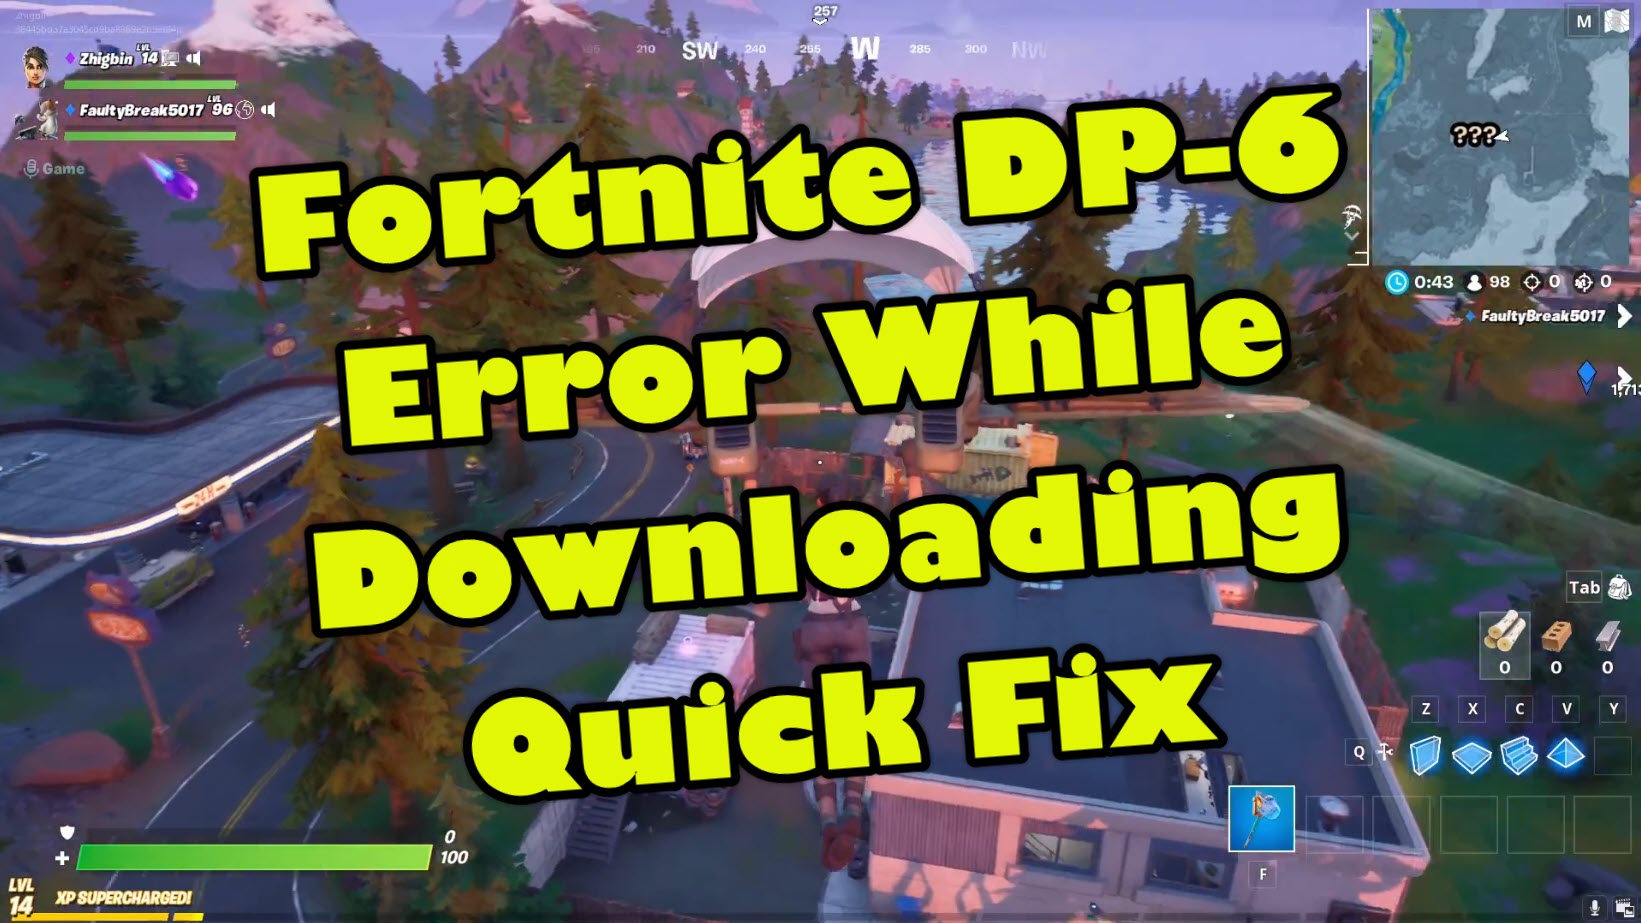 Fortnite Dp 6 Error While Downloading Quick Fix The Droid Guy